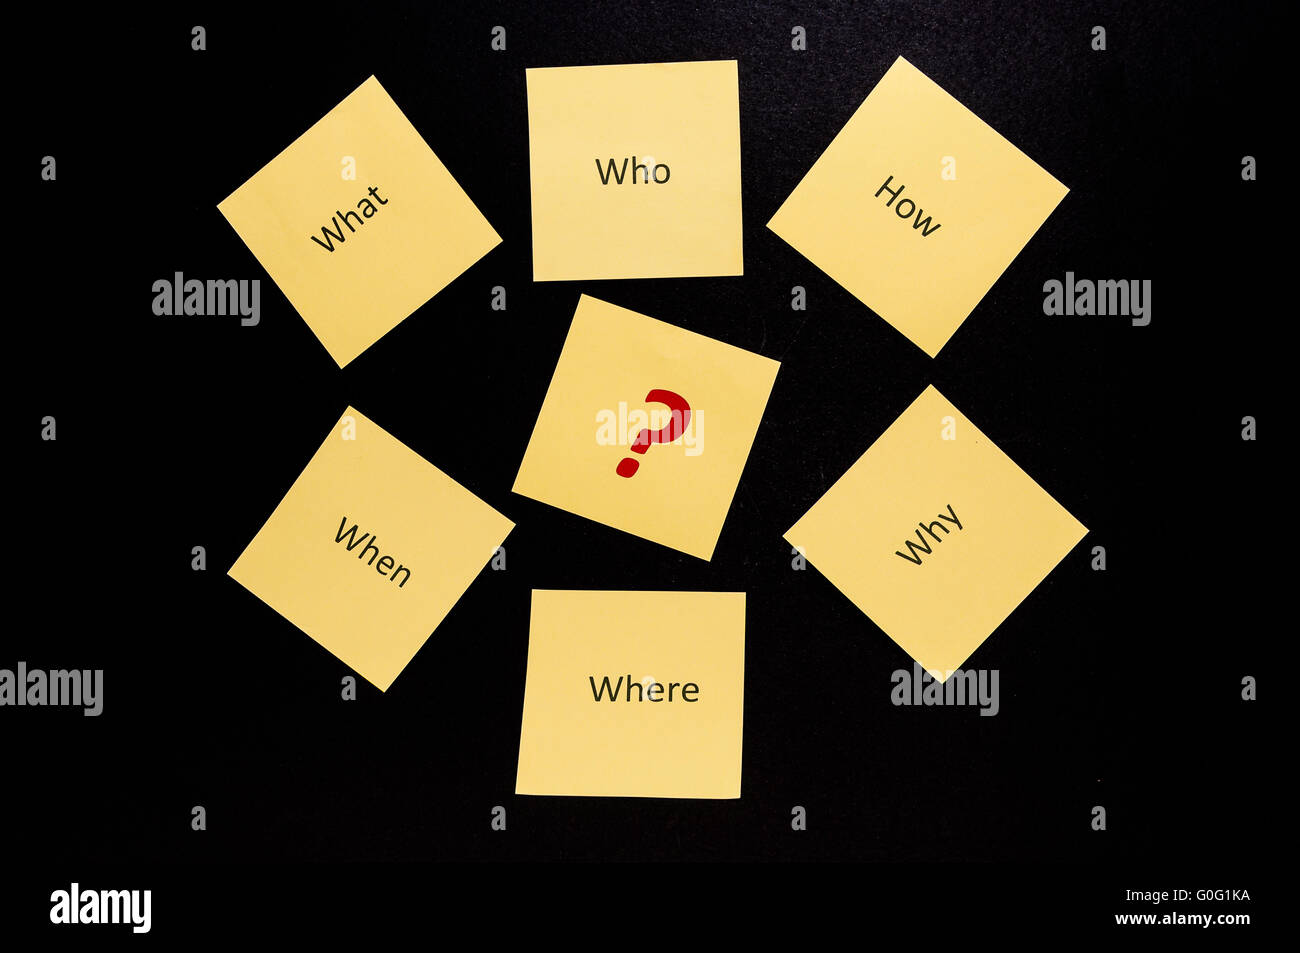 Various roles with the most frequent questions Stock Photo